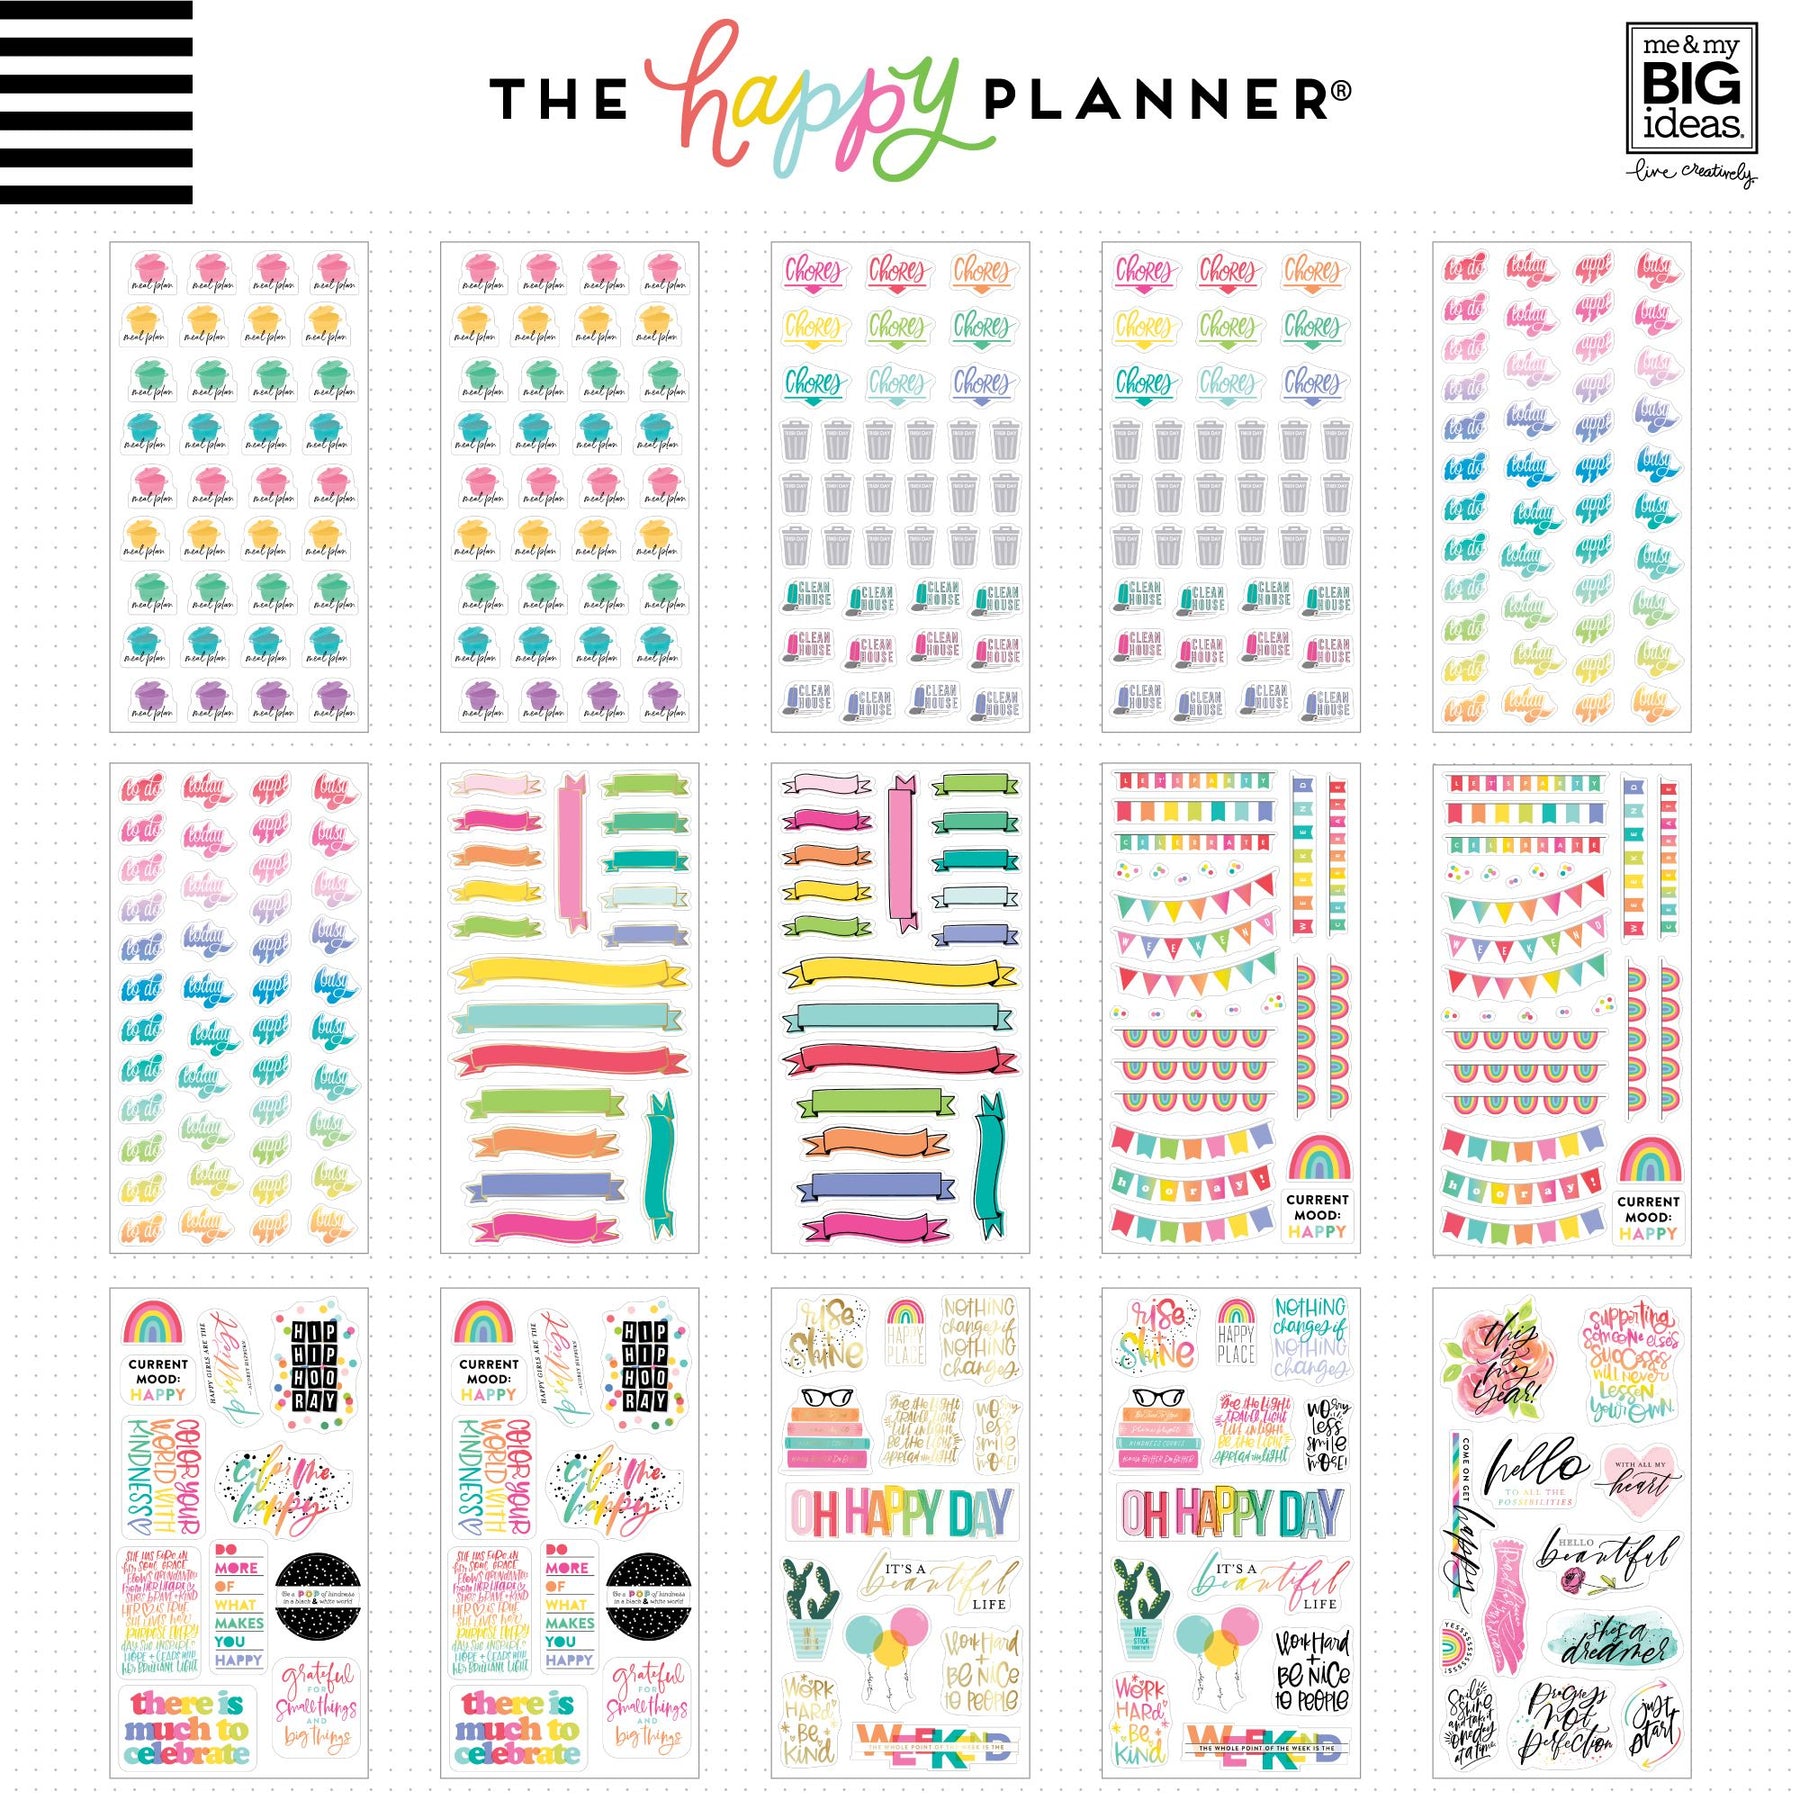 The Happy Planner® All the Essentials Mega Value Pack Stickers